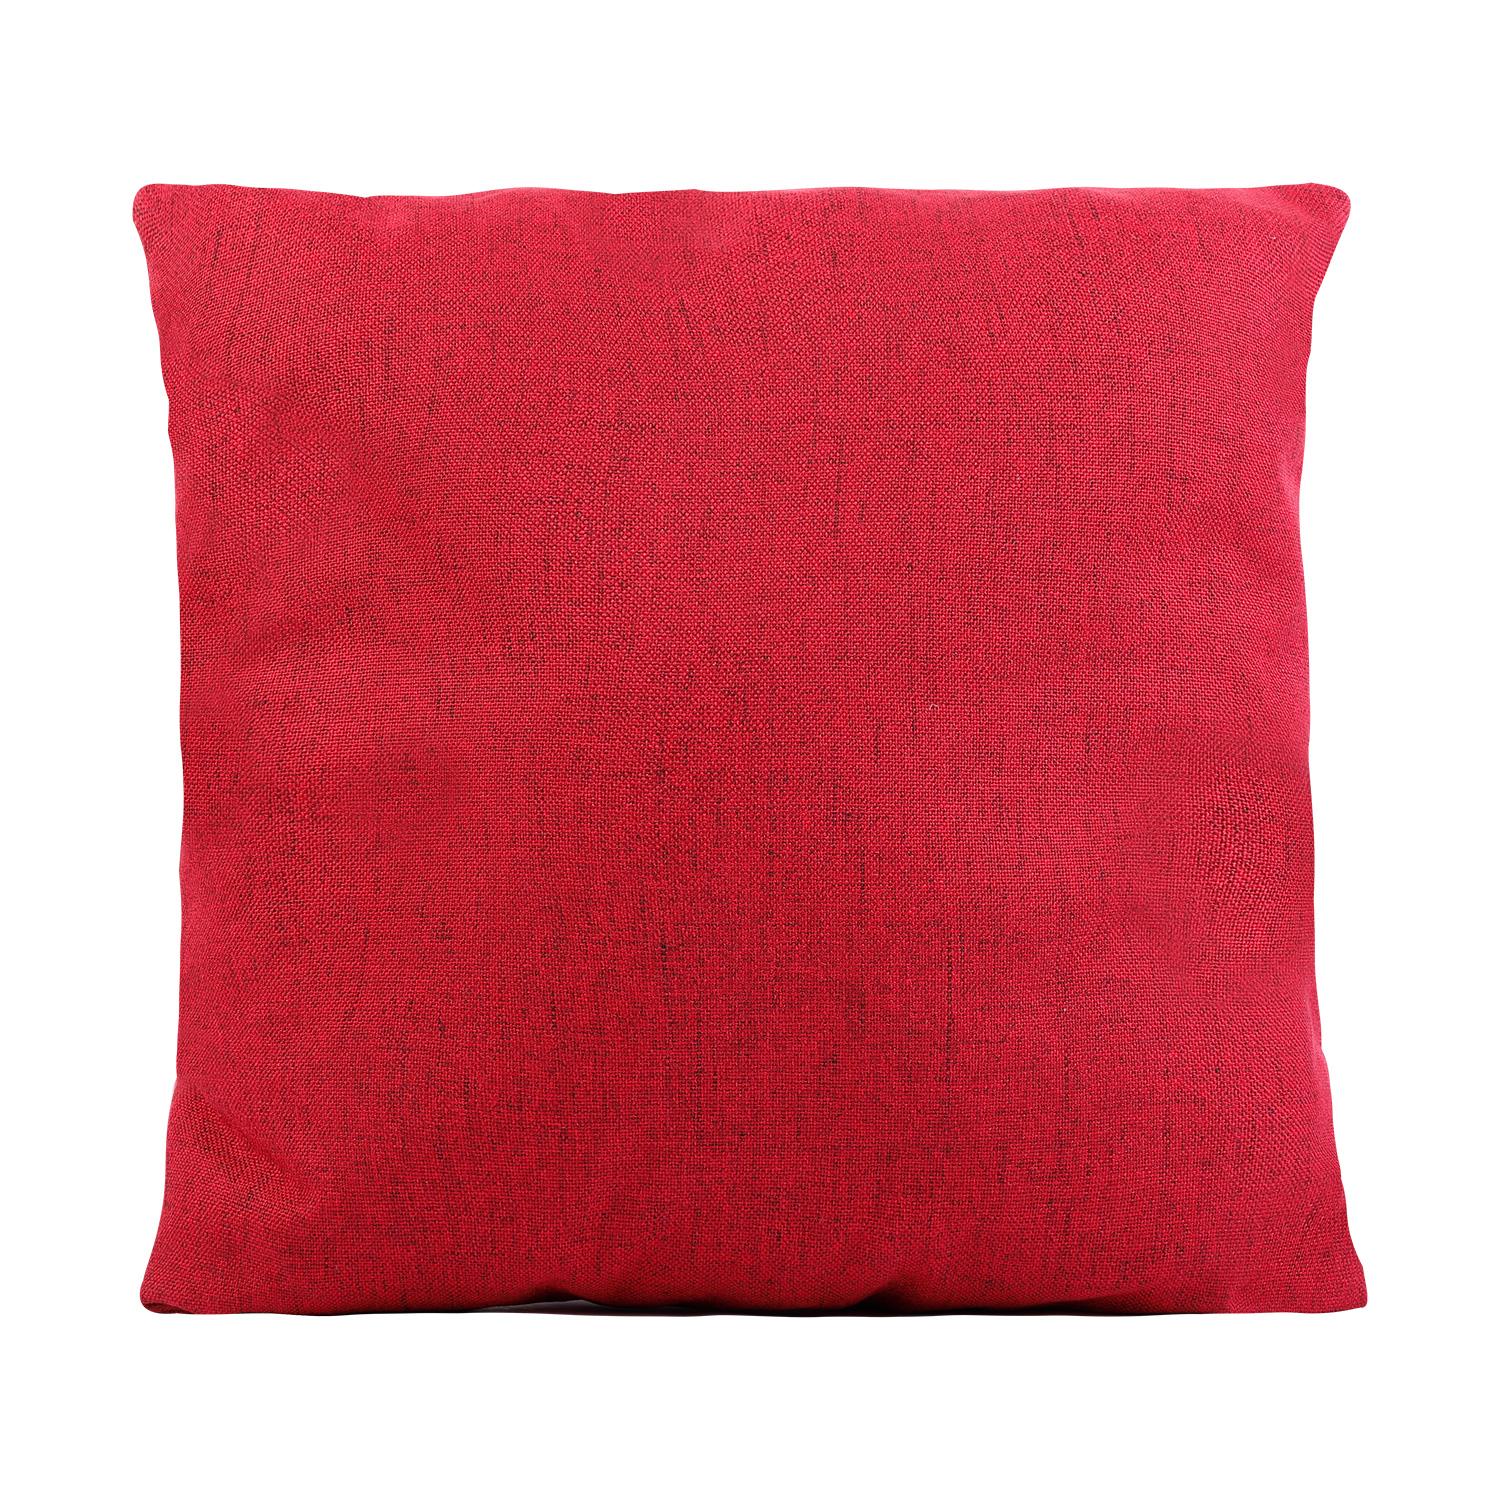 PARRY LIFE Decorative Jacquard Cushion Pillow - Decorative Square Pillow Case - Ideal Pillow for Livingroom Sofa Couch Bedroom Car, 44cmx44cm - Square Cushion Pillow, Perfect to Match any Ho